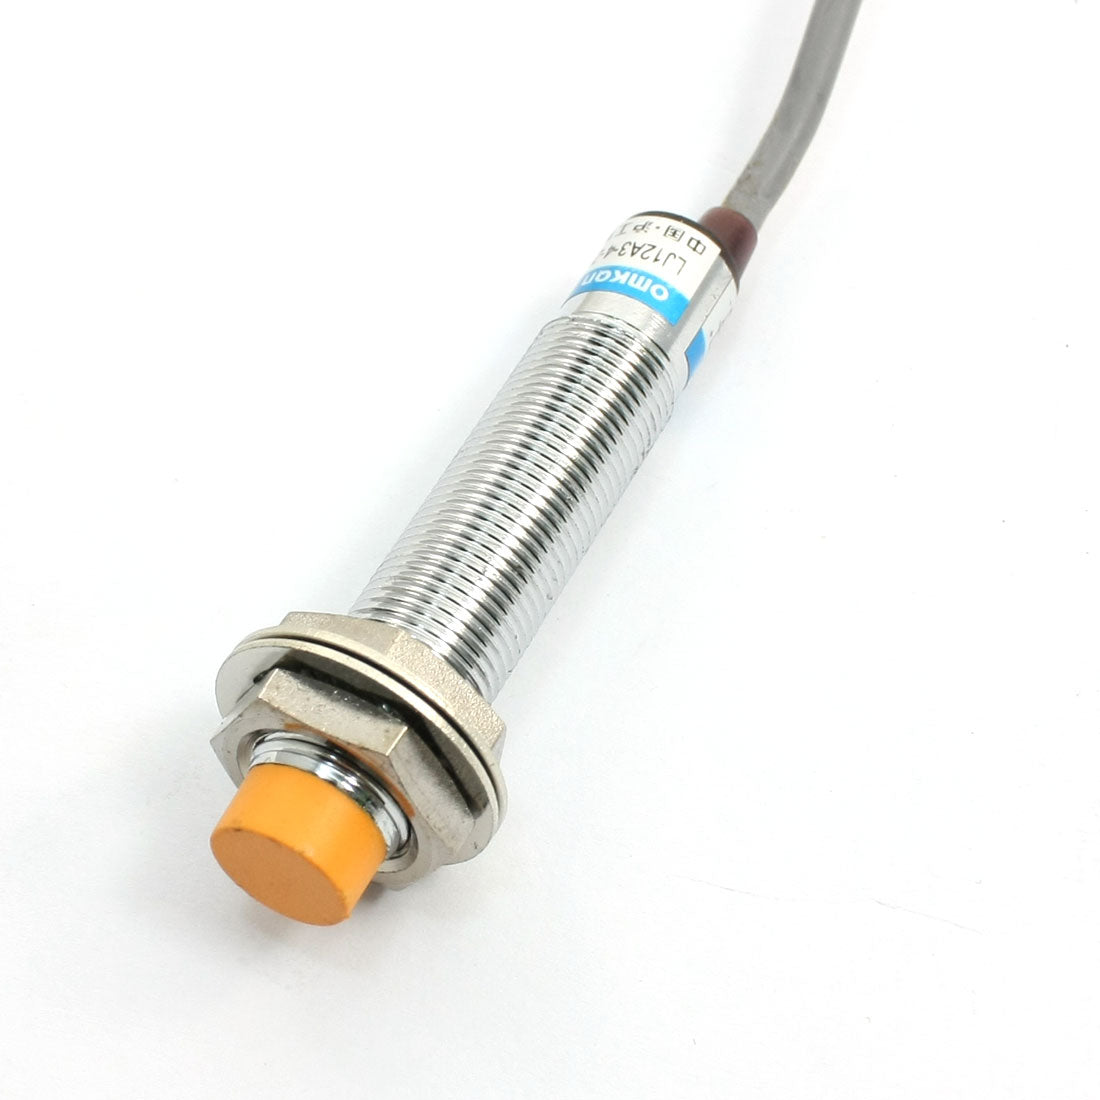 uxcell Uxcell LJ12A3-4-Z/BY DC 6-36V 3 Wire 4mm Detection PNP NO Inductive Proximity Sensor Switch 300mA